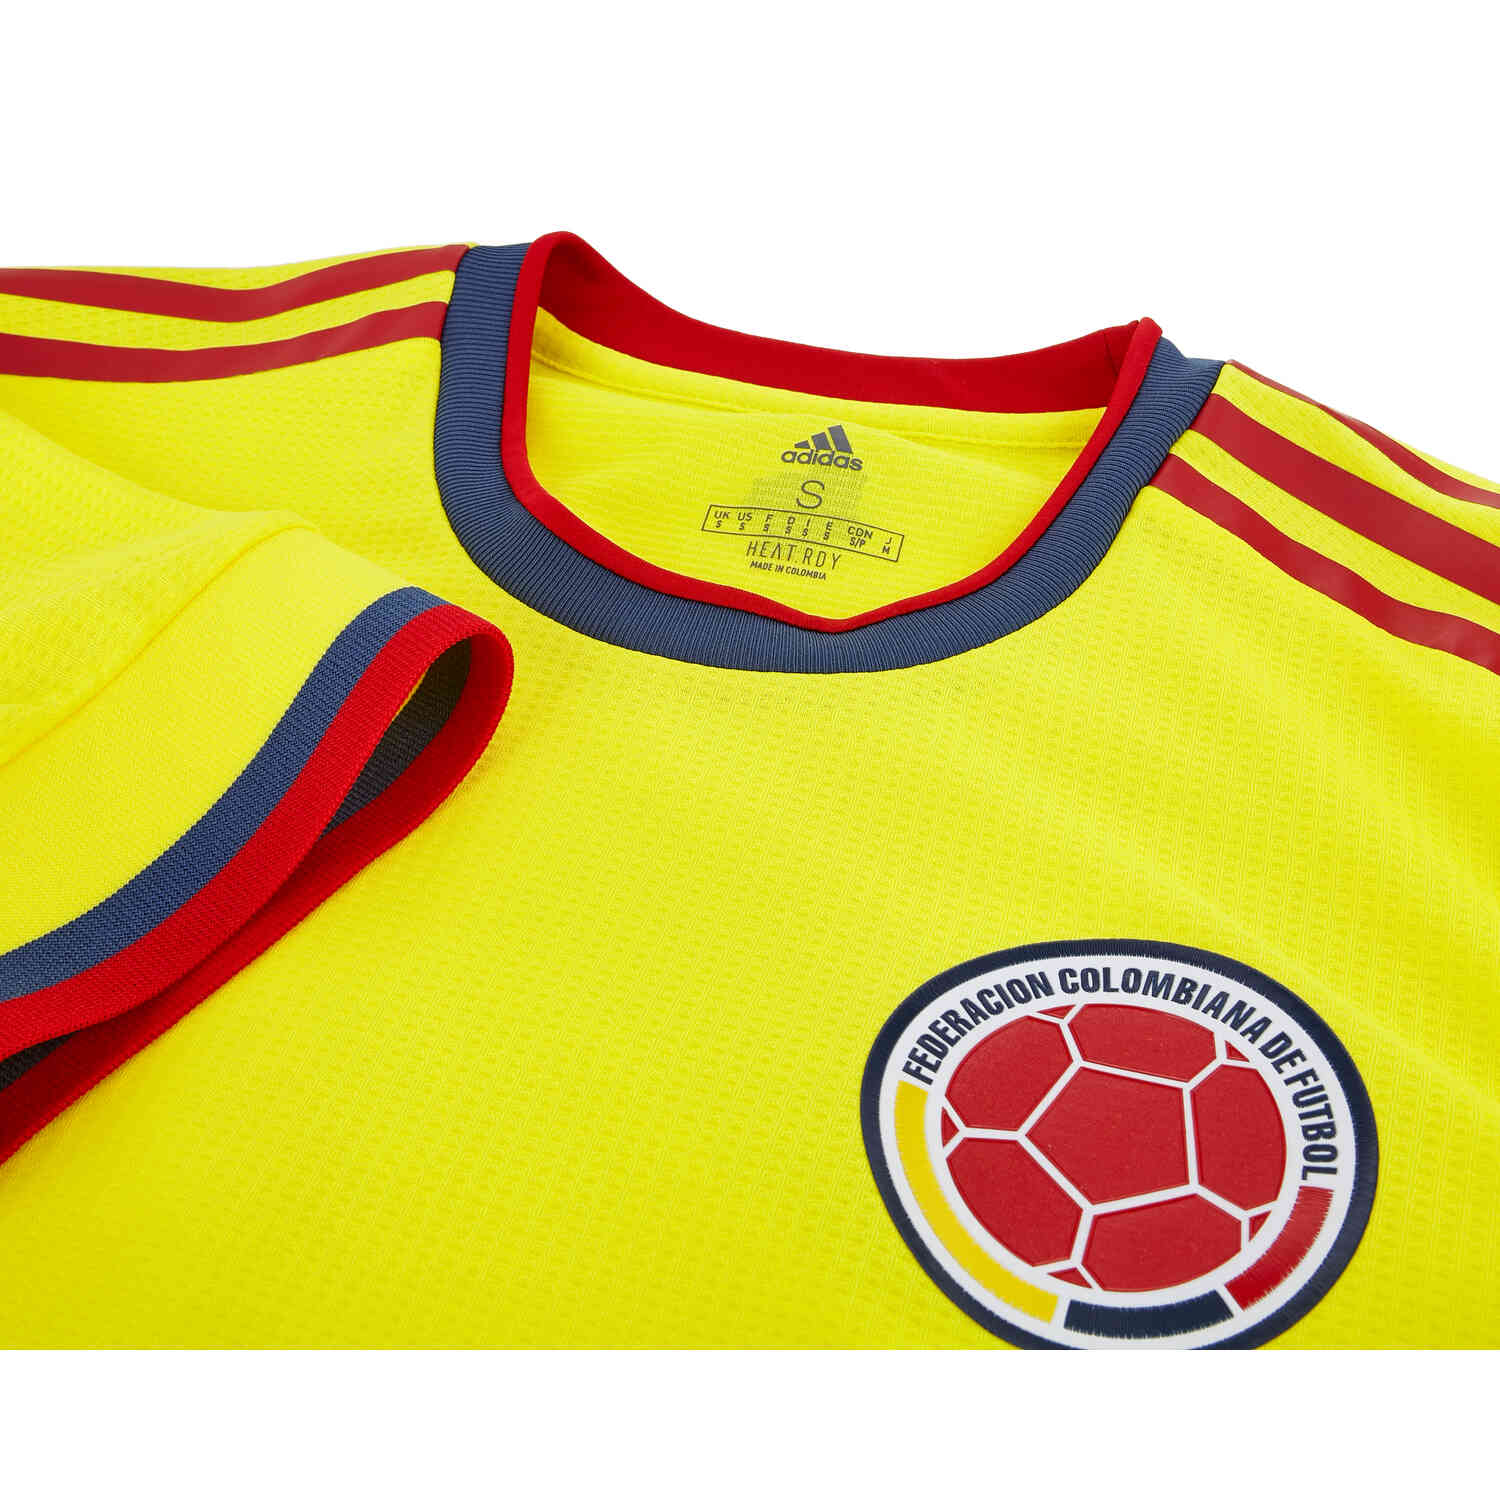 Adidas Colombia 2021 Home Jersey Unboxing + Review 